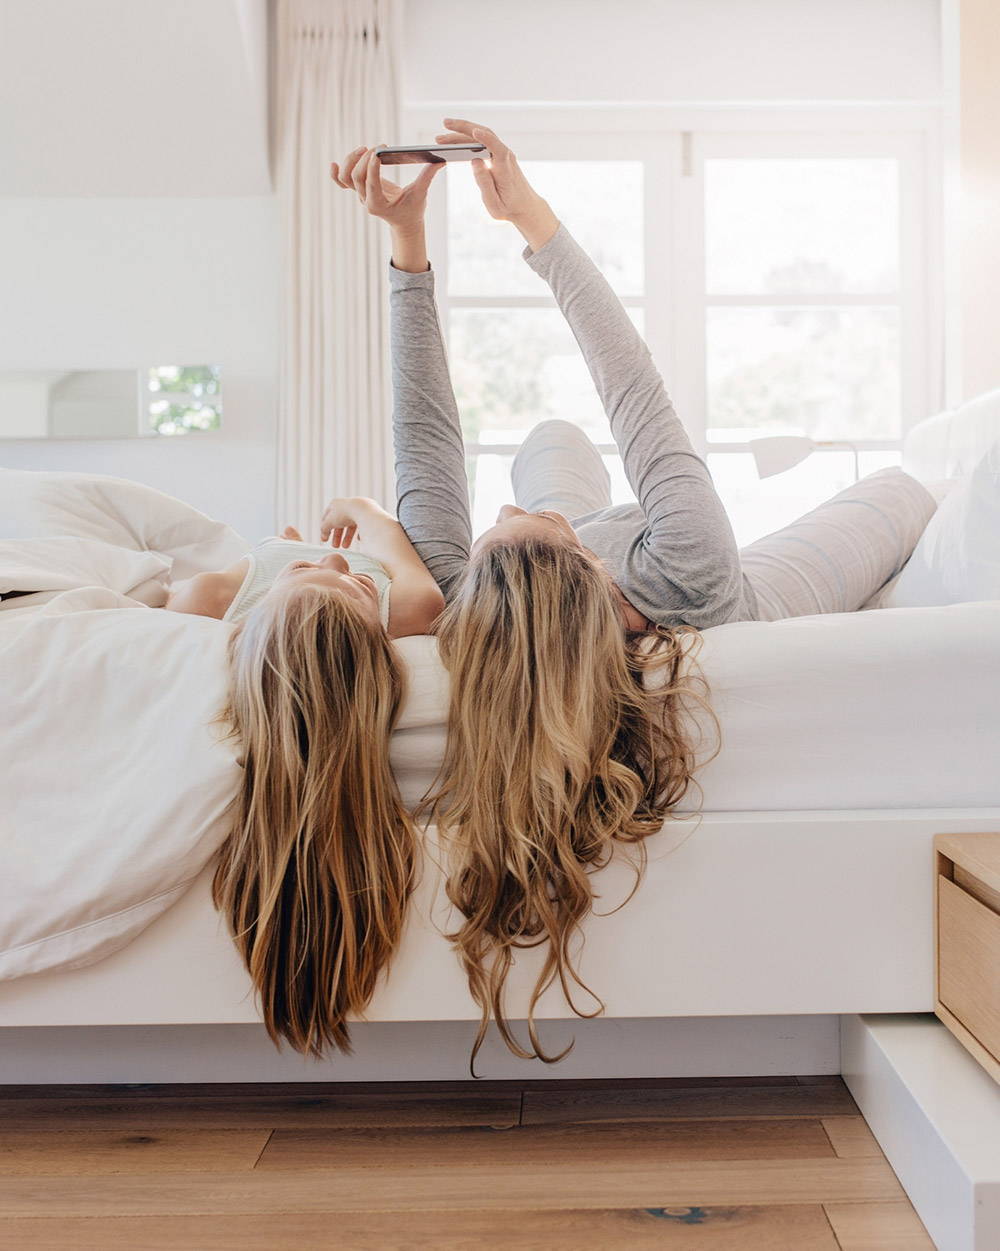 How to help your teen sleep better - image shows two girls lying on a bed and looking at a phone